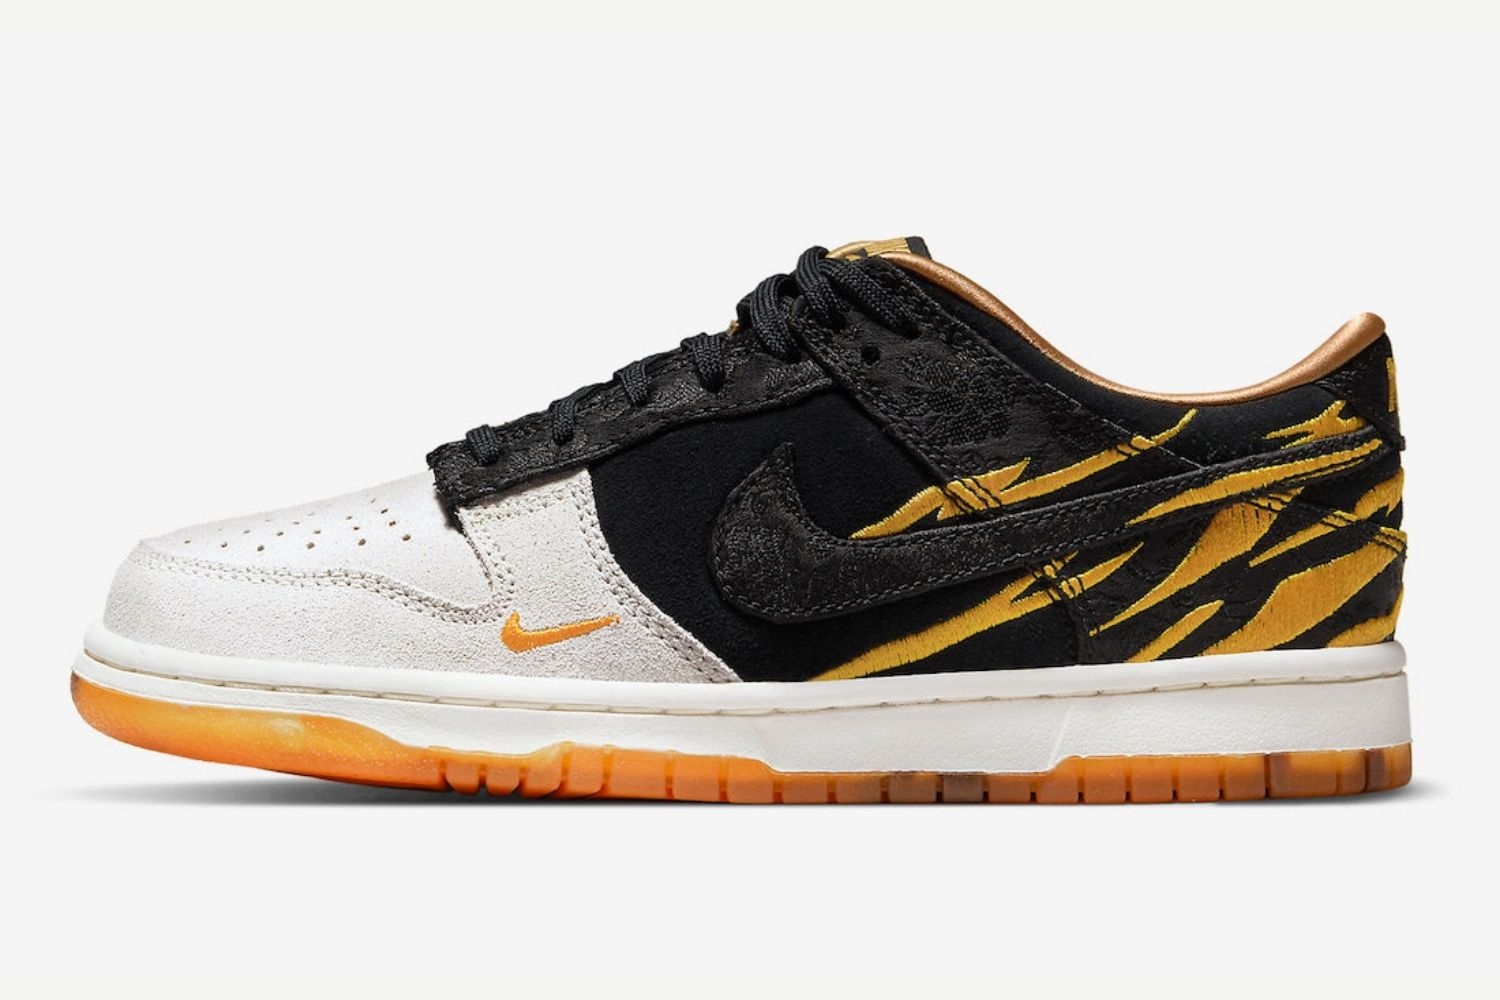 Nike Dunk Low 'Year of the Tiger' drops in 2022